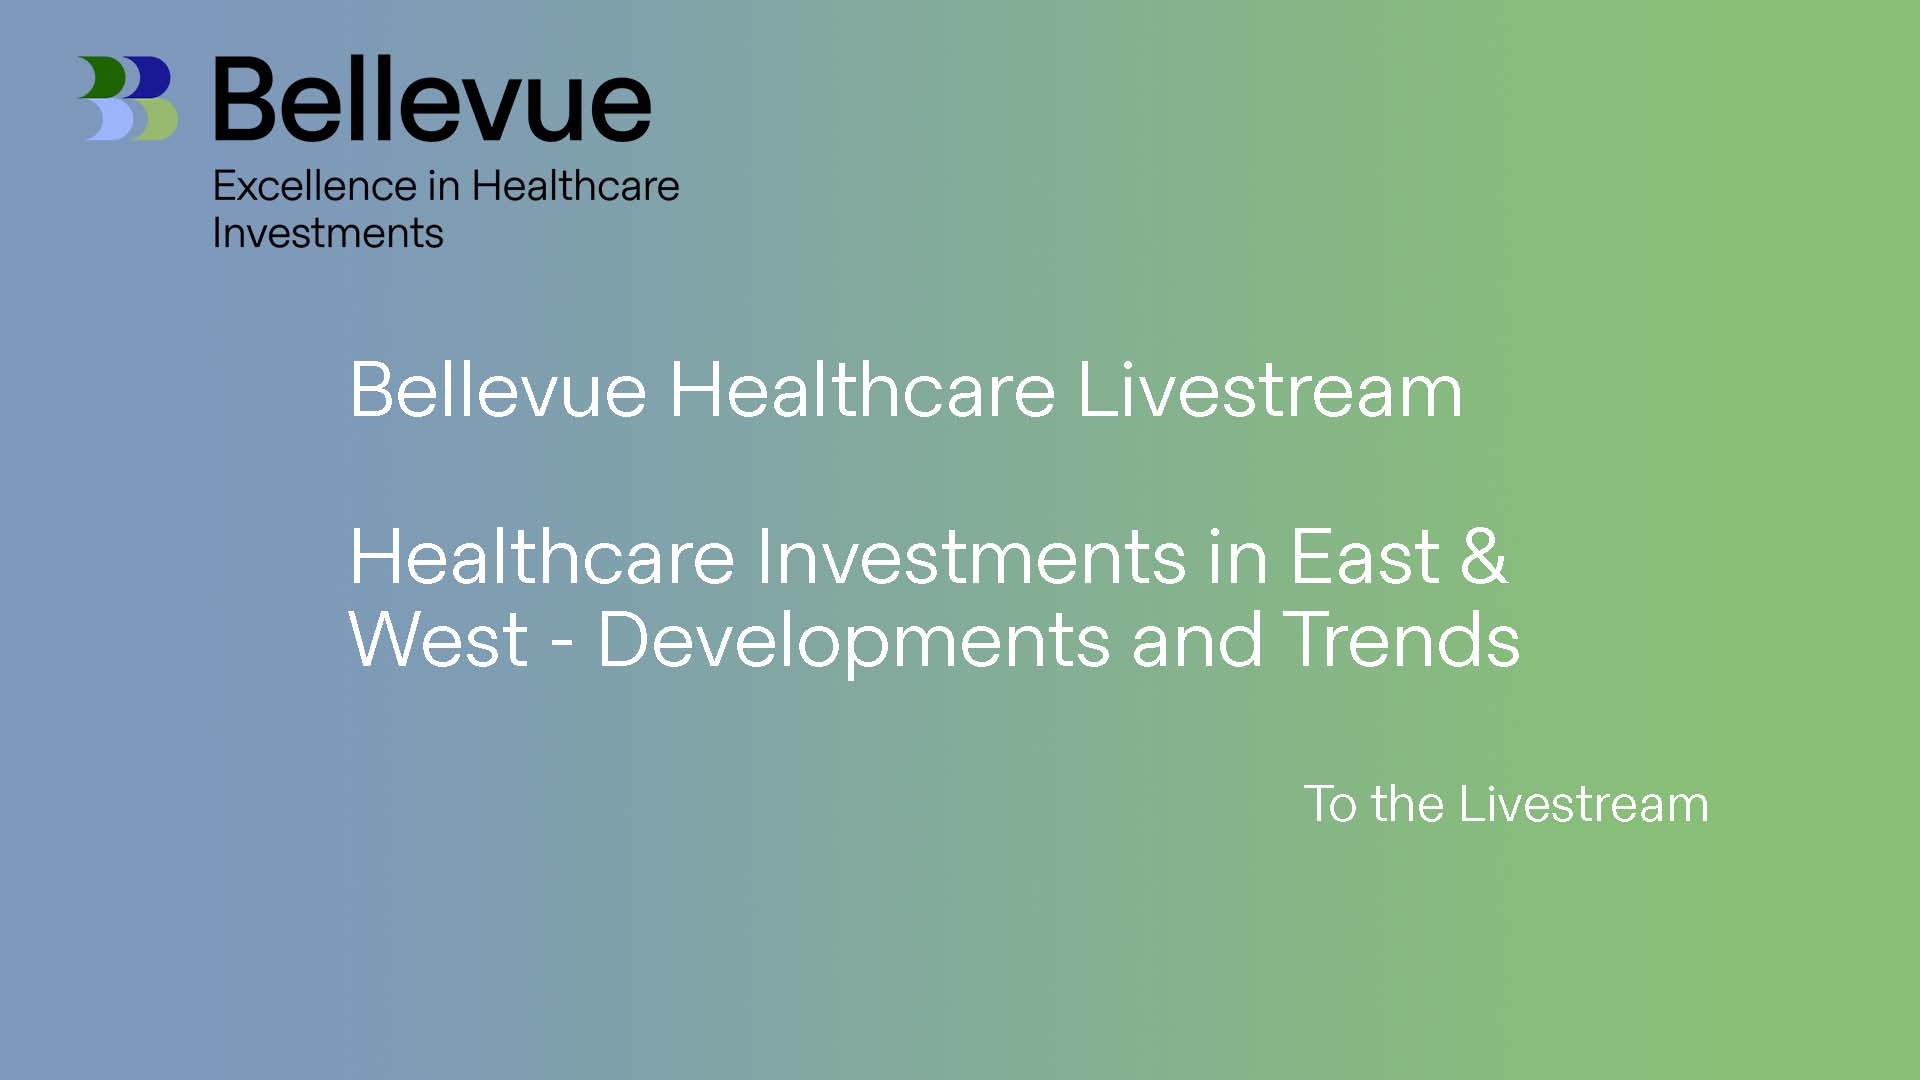 Bellevue Healthcare Livestream

Healthcare Investments in East & West - Developments and Trends